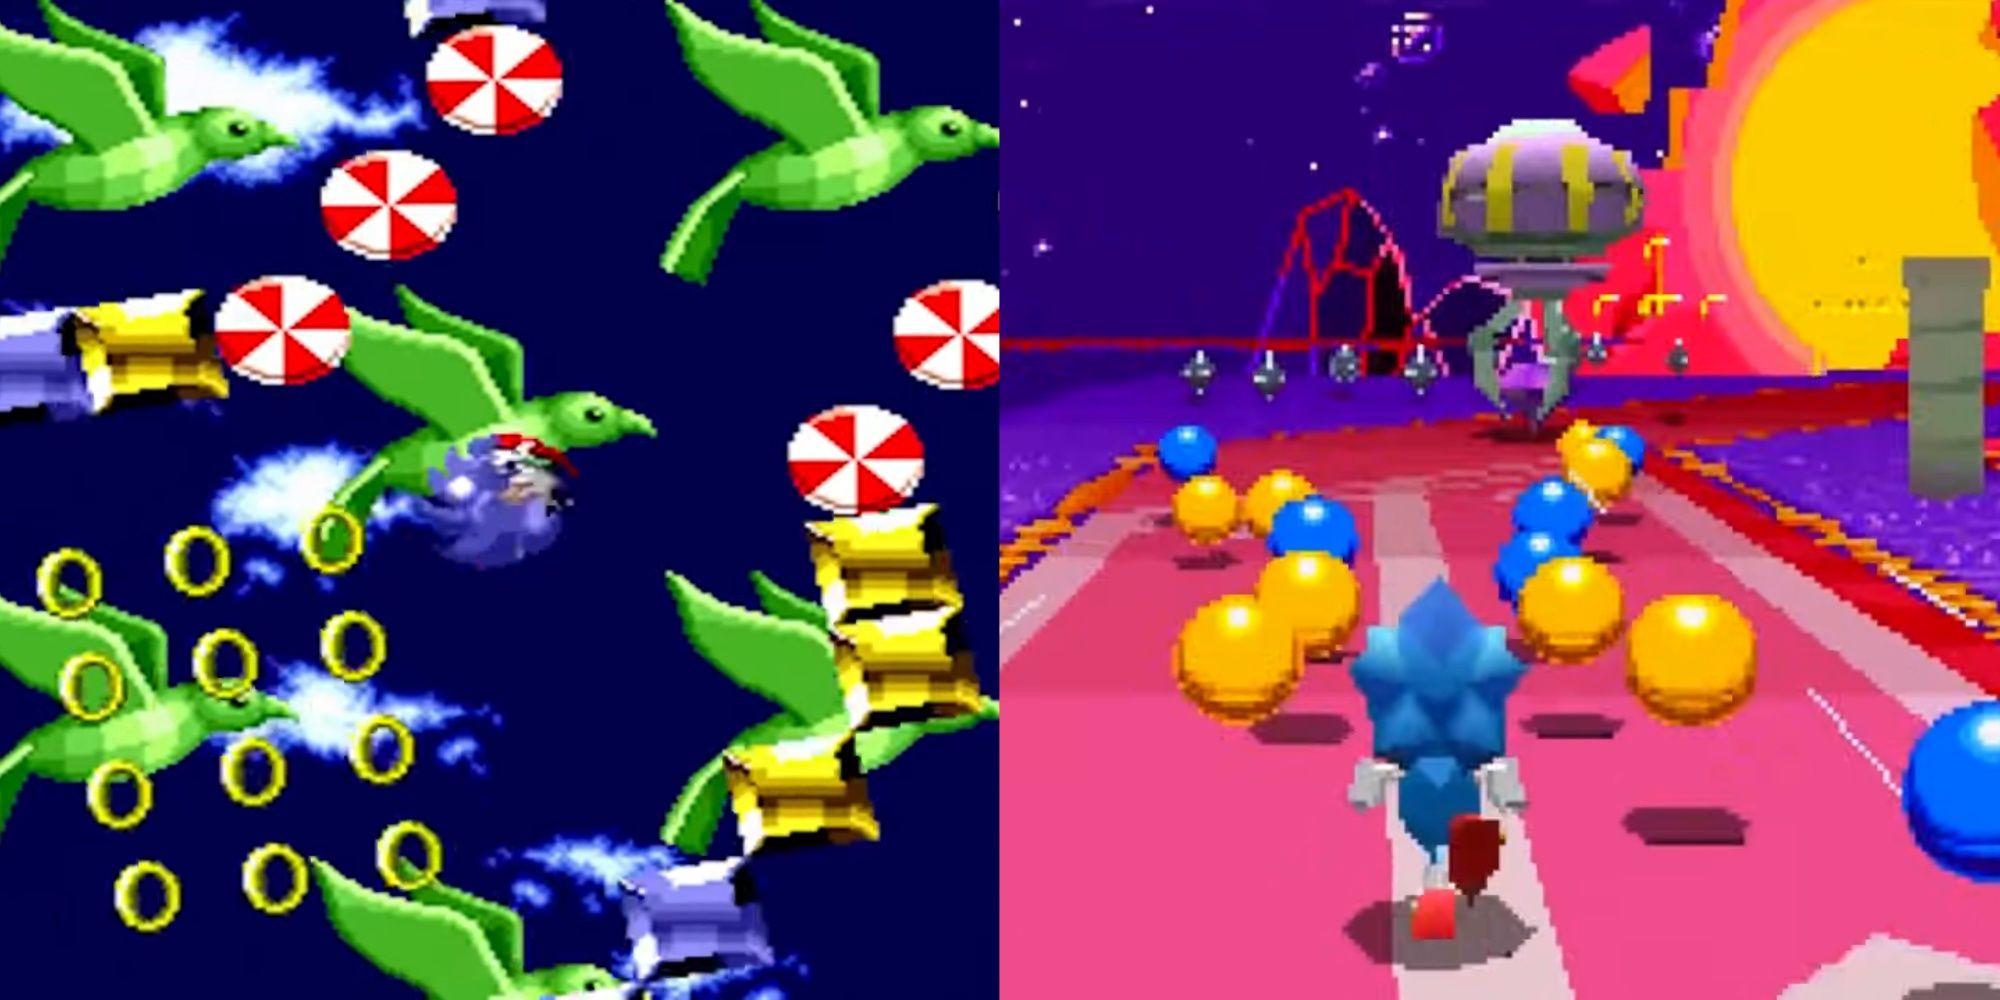 Sonic 1 Special Version